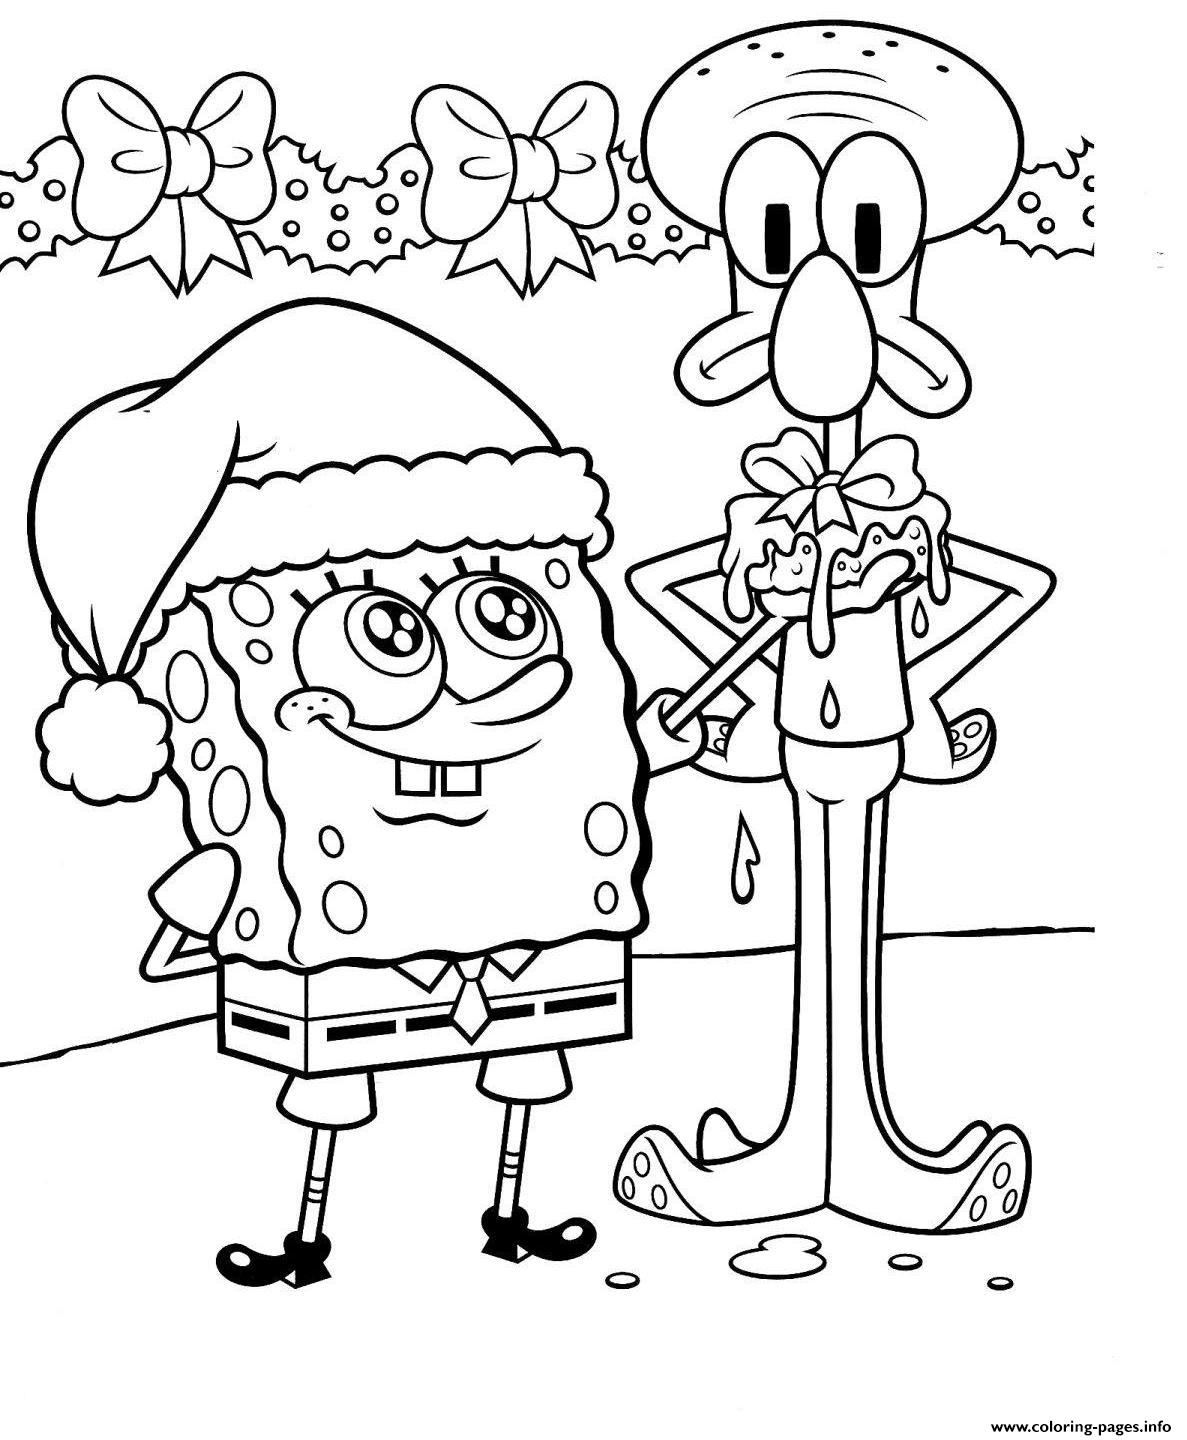 Spongebob Colouring Pages For Children Christmasb17e17 Coloring